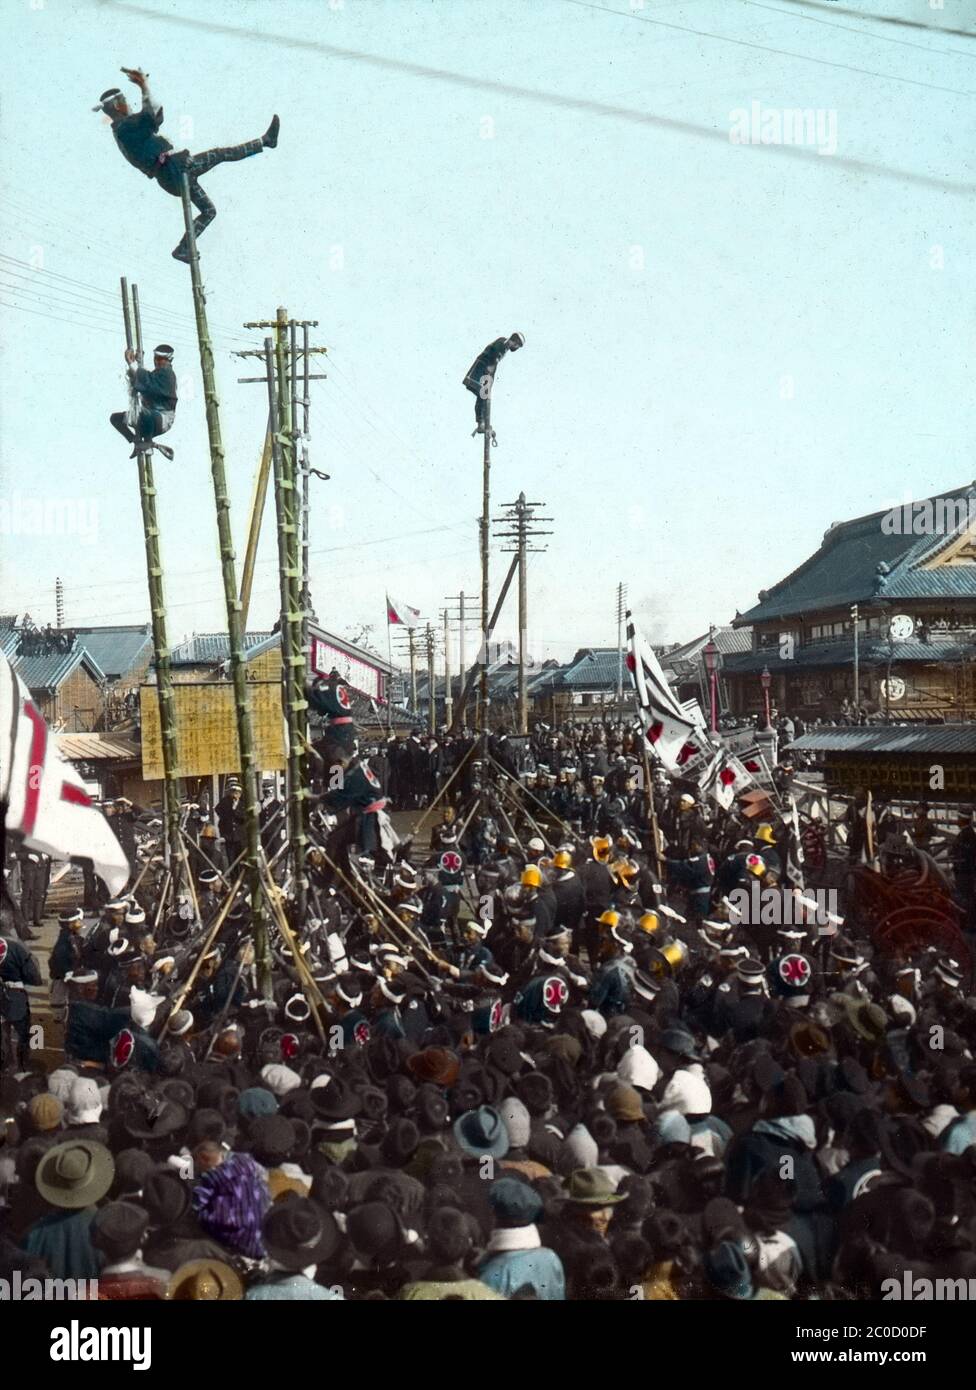 [ 1900s Japan - Japanese Firefighters ] — Firefighters in happi coats perform acrobatic stunts on top of bamboo ladders at Yoshidabashi in Yokohama, Kanagawa Prefecture.  The ladder stunts were the main event of Japanese New Year celebrations.  The demonstrations, called dezome-shiki, were intended to warn people of the dangers of fire, and to demonstrate the agility and courage of the firefighters.  20th century vintage glass slide. Stock Photo